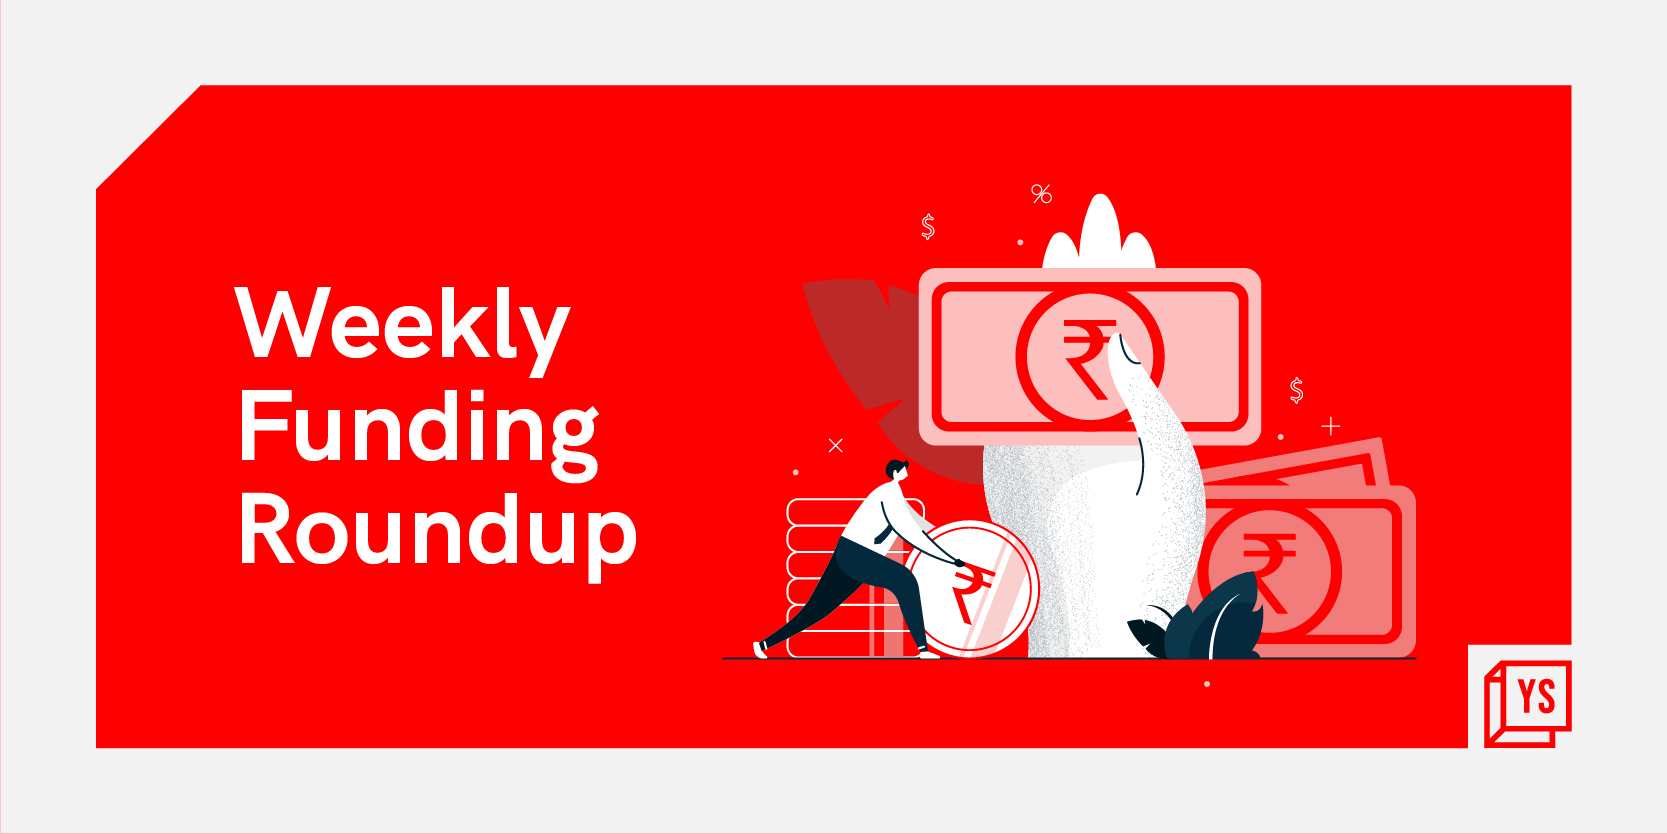 [Weekly Funding Roundup] Venture investments into Indian startups declines to 4M